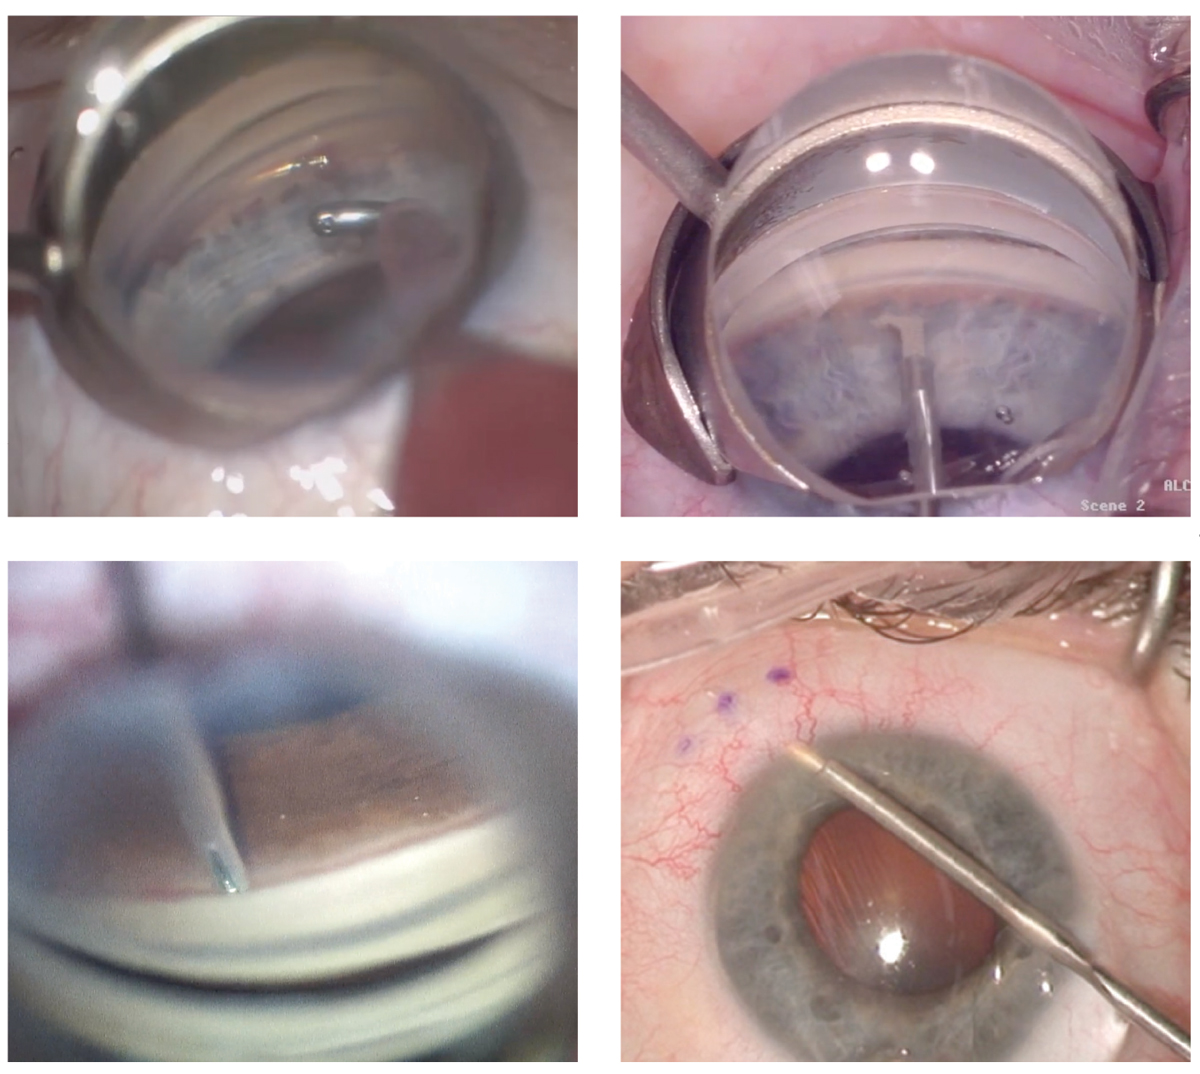 The development of minimally invasive glaucoma surgeries for use at the time of cataract surgery has increased the capabilities of surgeons—and the expectations placed on comanaging optometrists, who need to be able to sort out the many proceudres and make well-informed recommendations to the ophthalmologist. Clockwise from upper left: Hydrus Microstent (Ivantis), Kahook Dual Blade (New World Medical), Xen implant (Allergan), iStent (Glaukos).